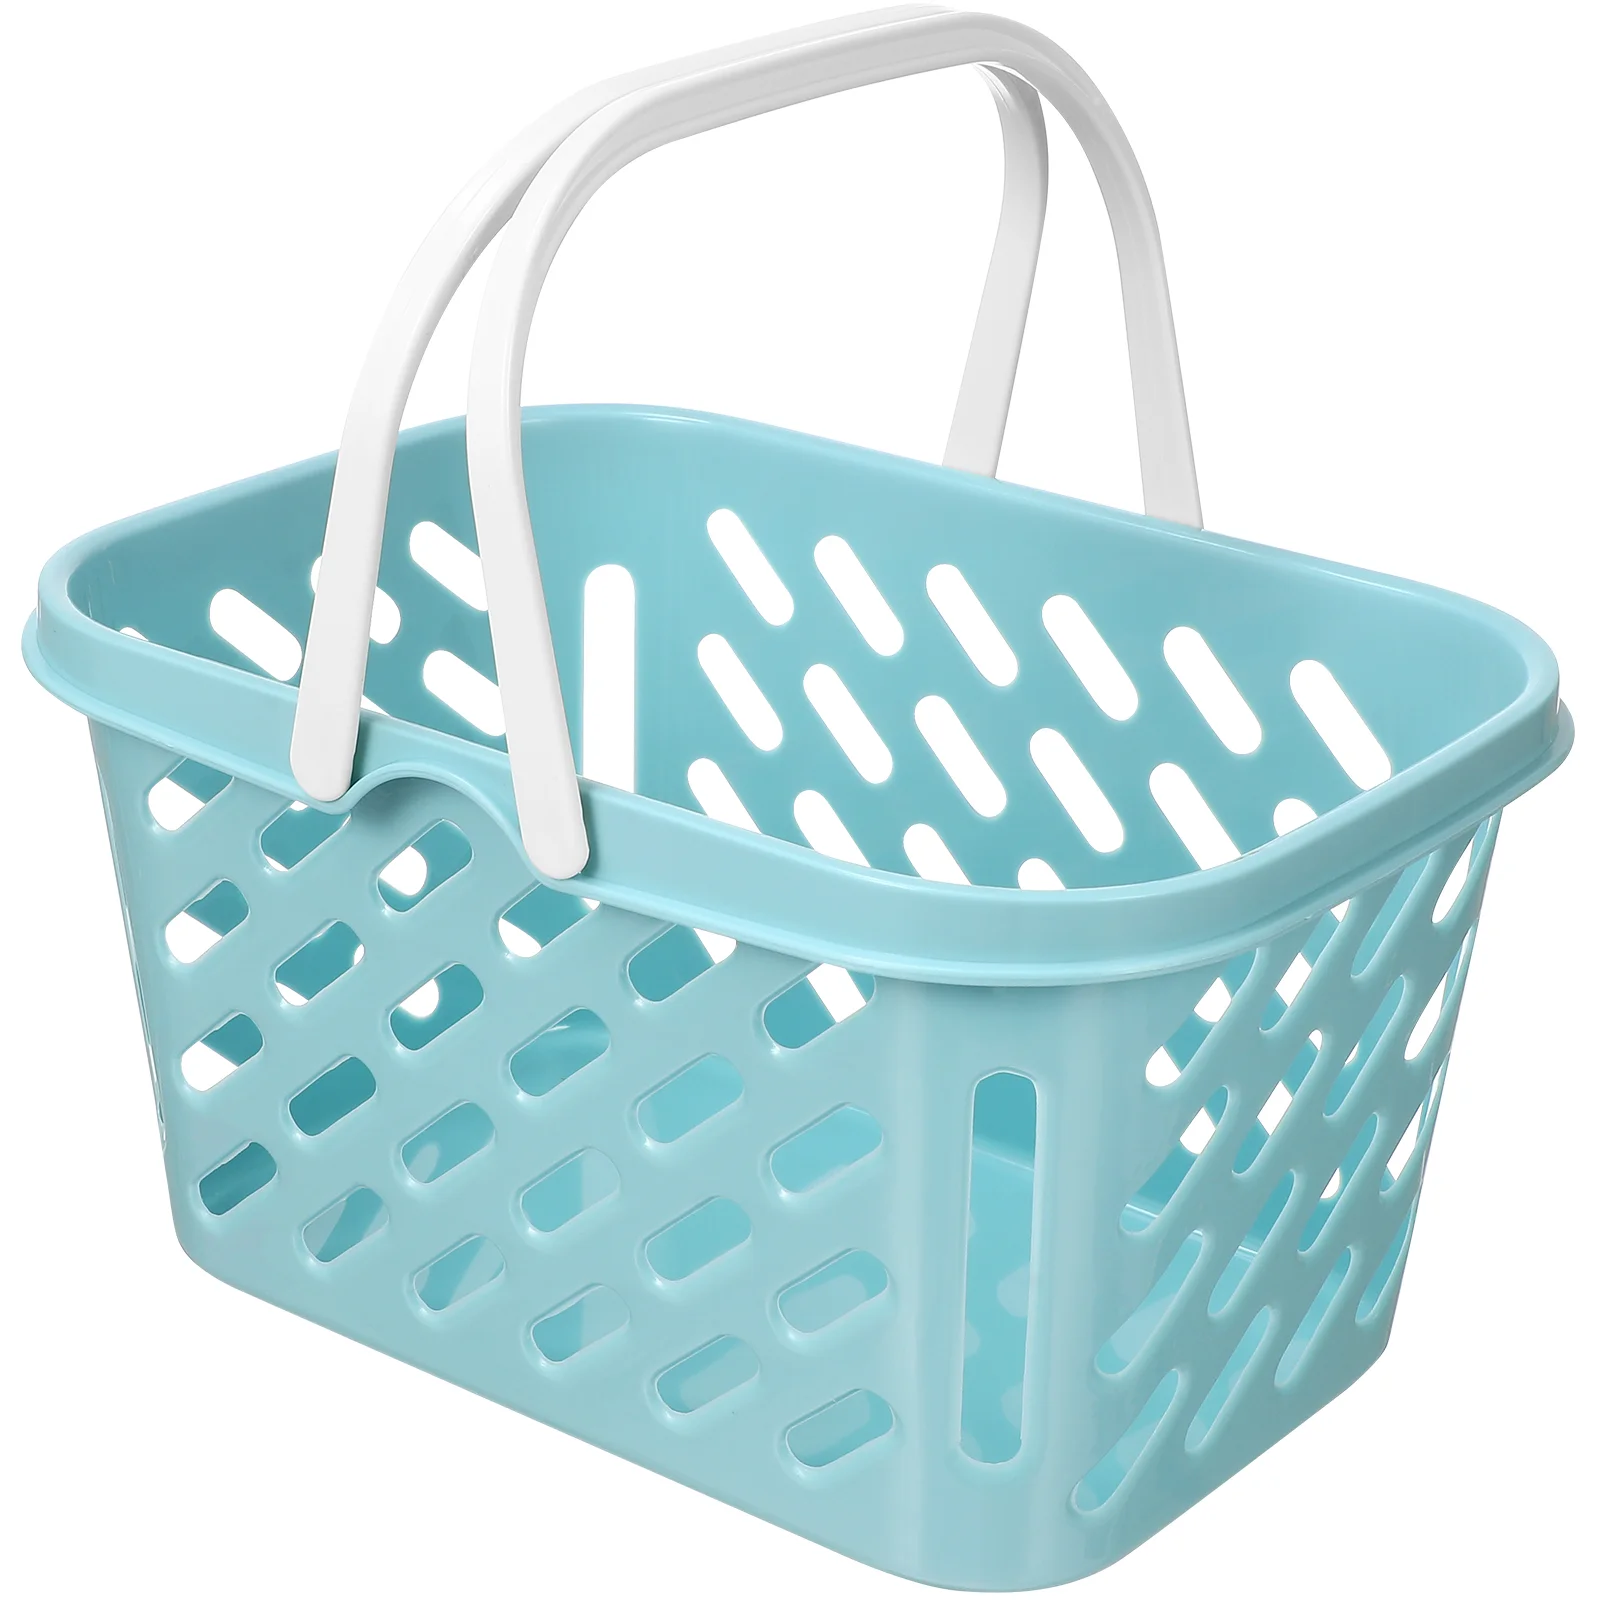 

Basket Shopping Grocery Kids Baskets Toy Play Mini Storage Handle Pretend Kitchen Cart Container Store Handles Easter Bin Toys